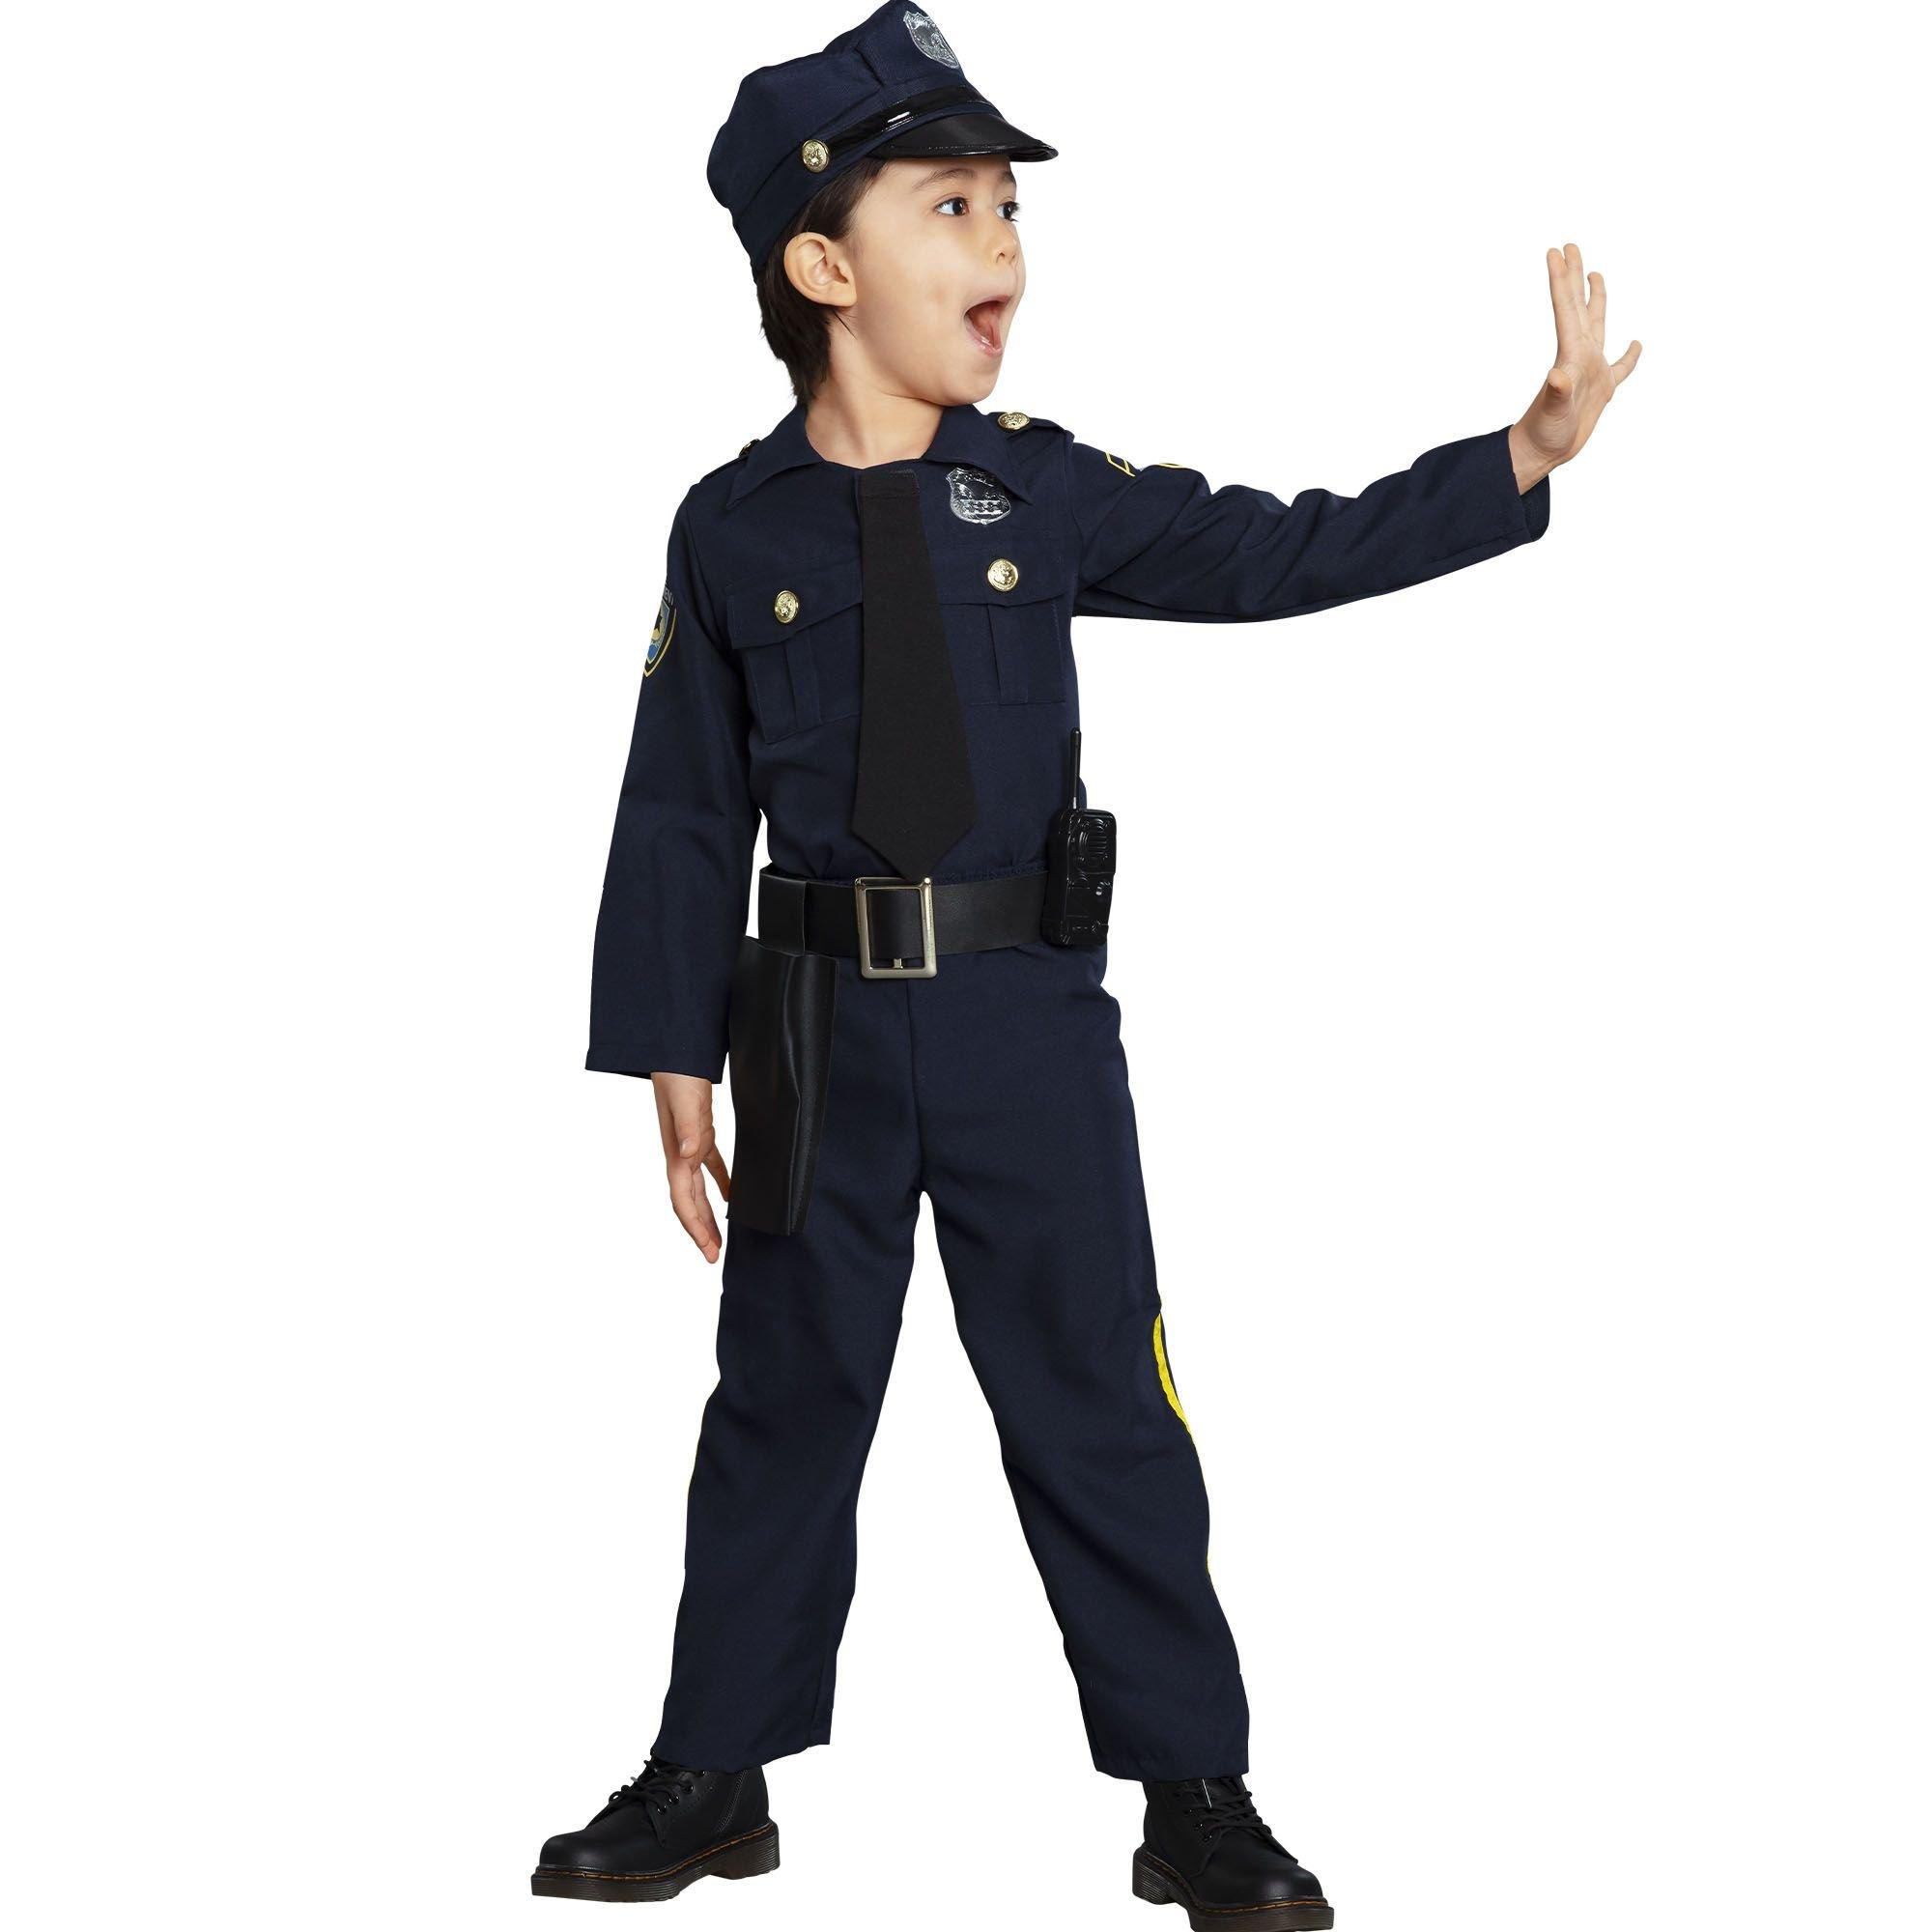 Toddler Police Officer Ride-Along Costume with Sound by Spirit Halloween